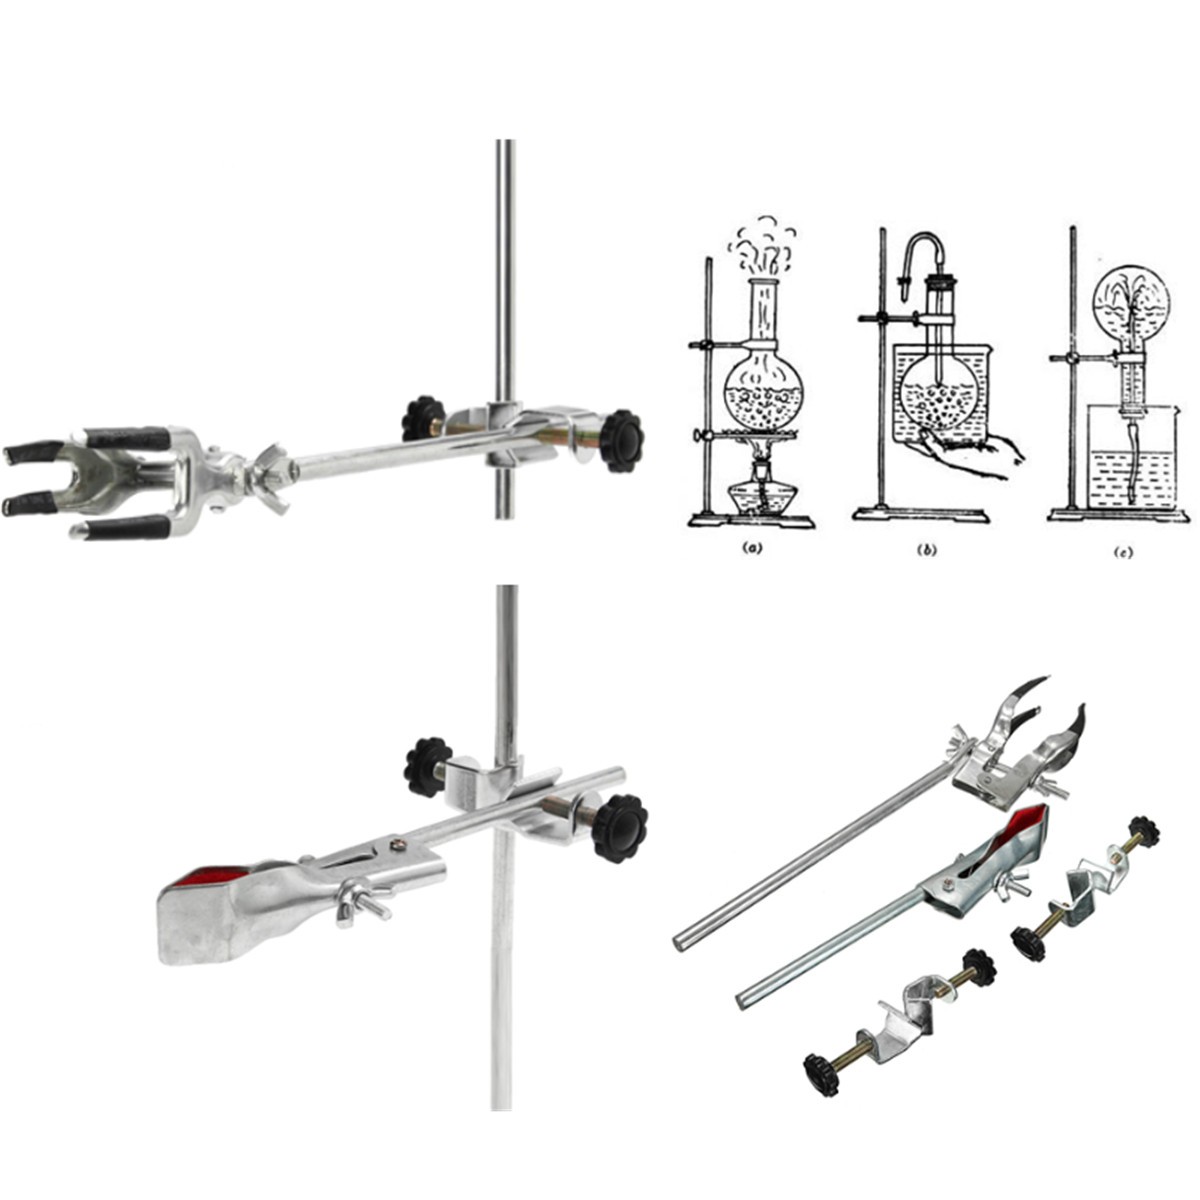 Laboratory-Stands-Support-Lab-Clamp-Flask-Clamp-Condenser-Clamp-Stand-Four-Prong-Extension-Flask-Cla-1410946-2